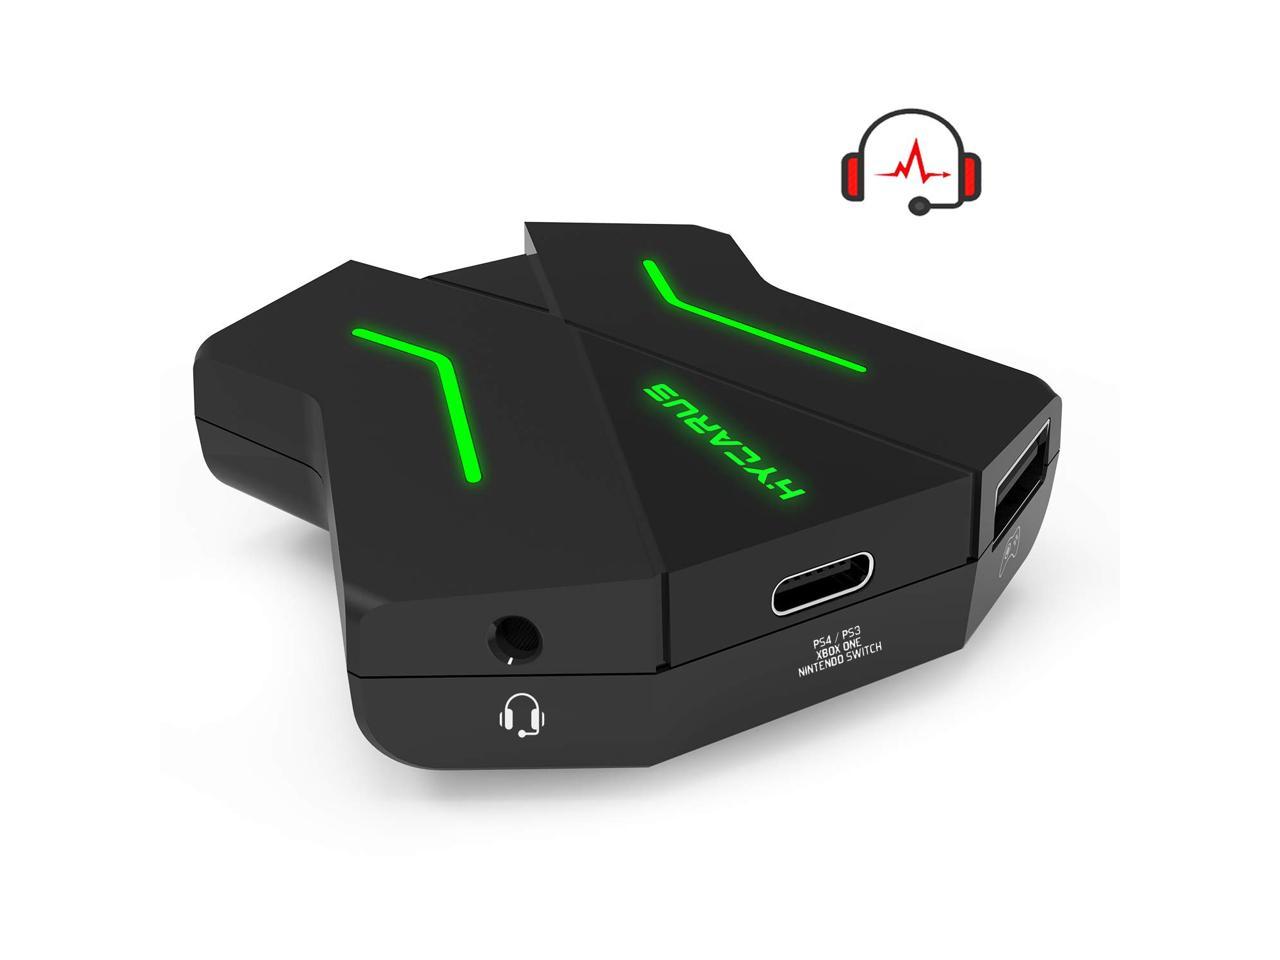 Адаптер для ps5. Адаптер Xbox one. Adapter ps3 Keyboard and Mouse. Ps4 адаптер 3.5. Адаптер для Xbox клавиатуры.